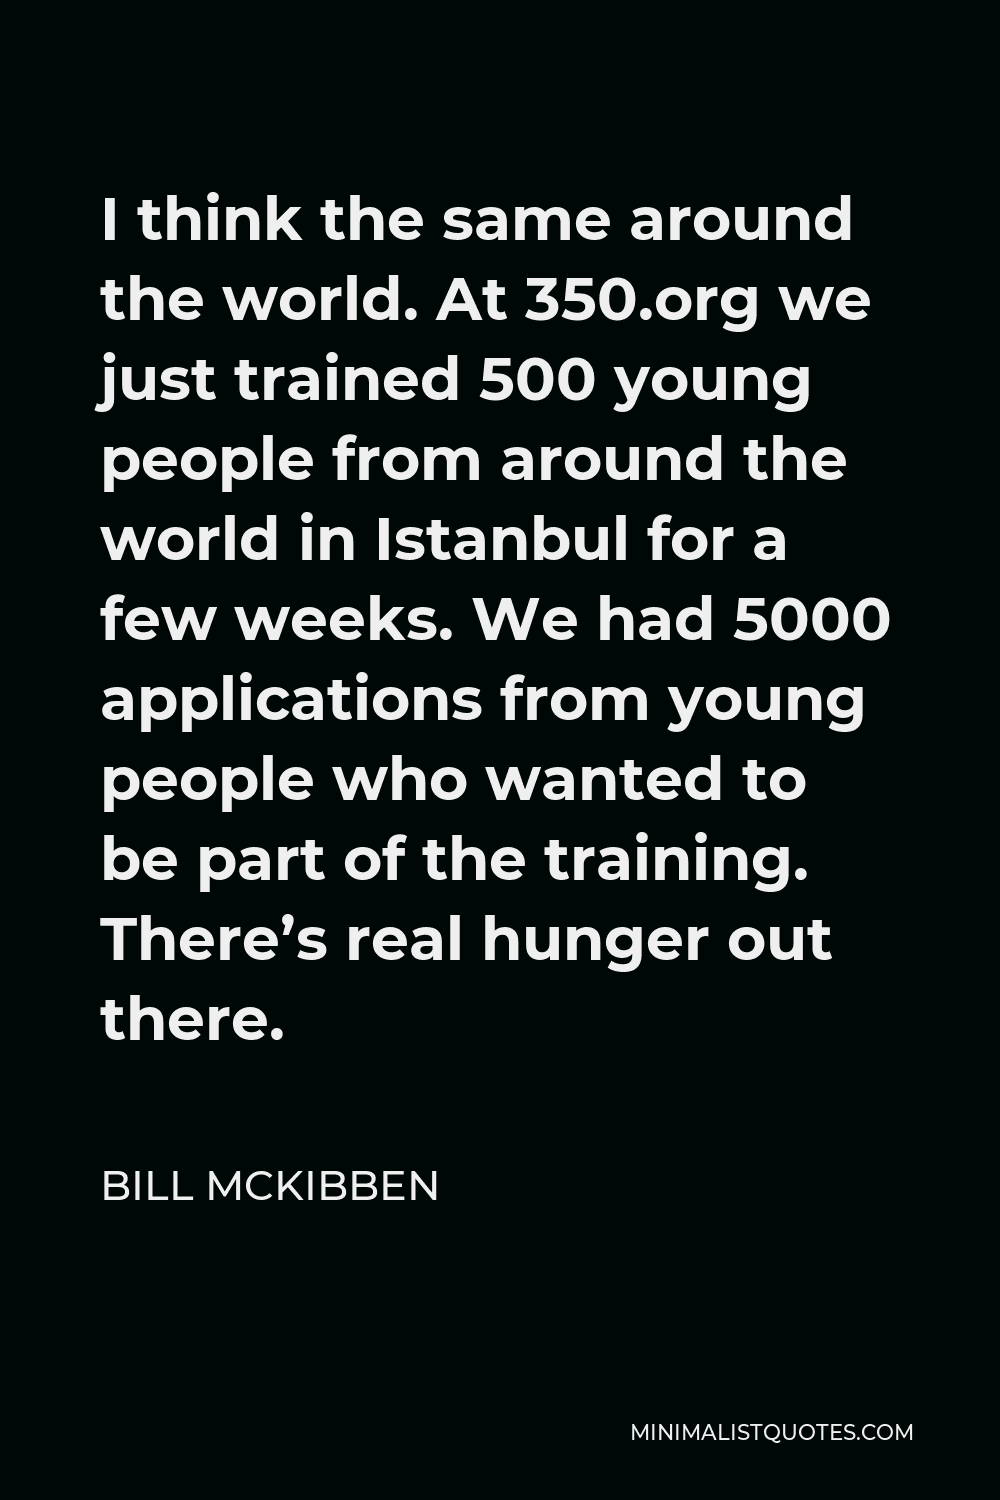 Bill McKibben Quote - I think the same around the world. At 350.org we just trained 500 young people from around the world in Istanbul for a few weeks. We had 5000 applications from young people who wanted to be part of the training. There’s real hunger out there.